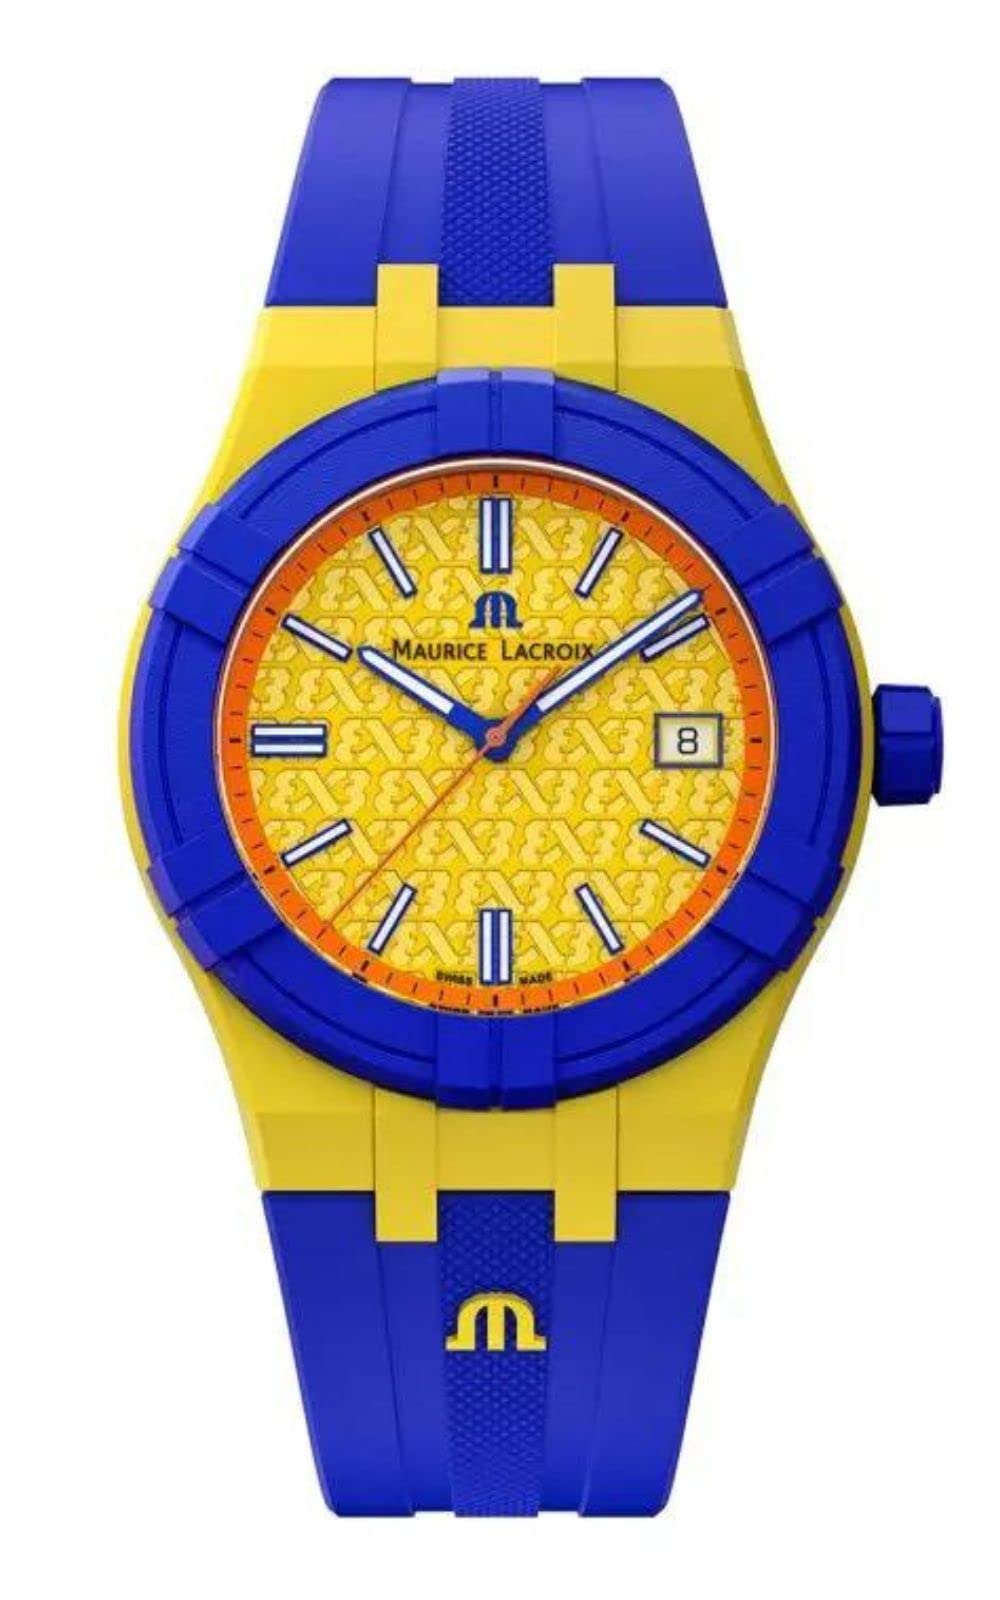 Maurice Lacroix Men's AI2008-68YZ8-800-0 Aikon Tide Special Edition FIBA Yellow and Blue Watch